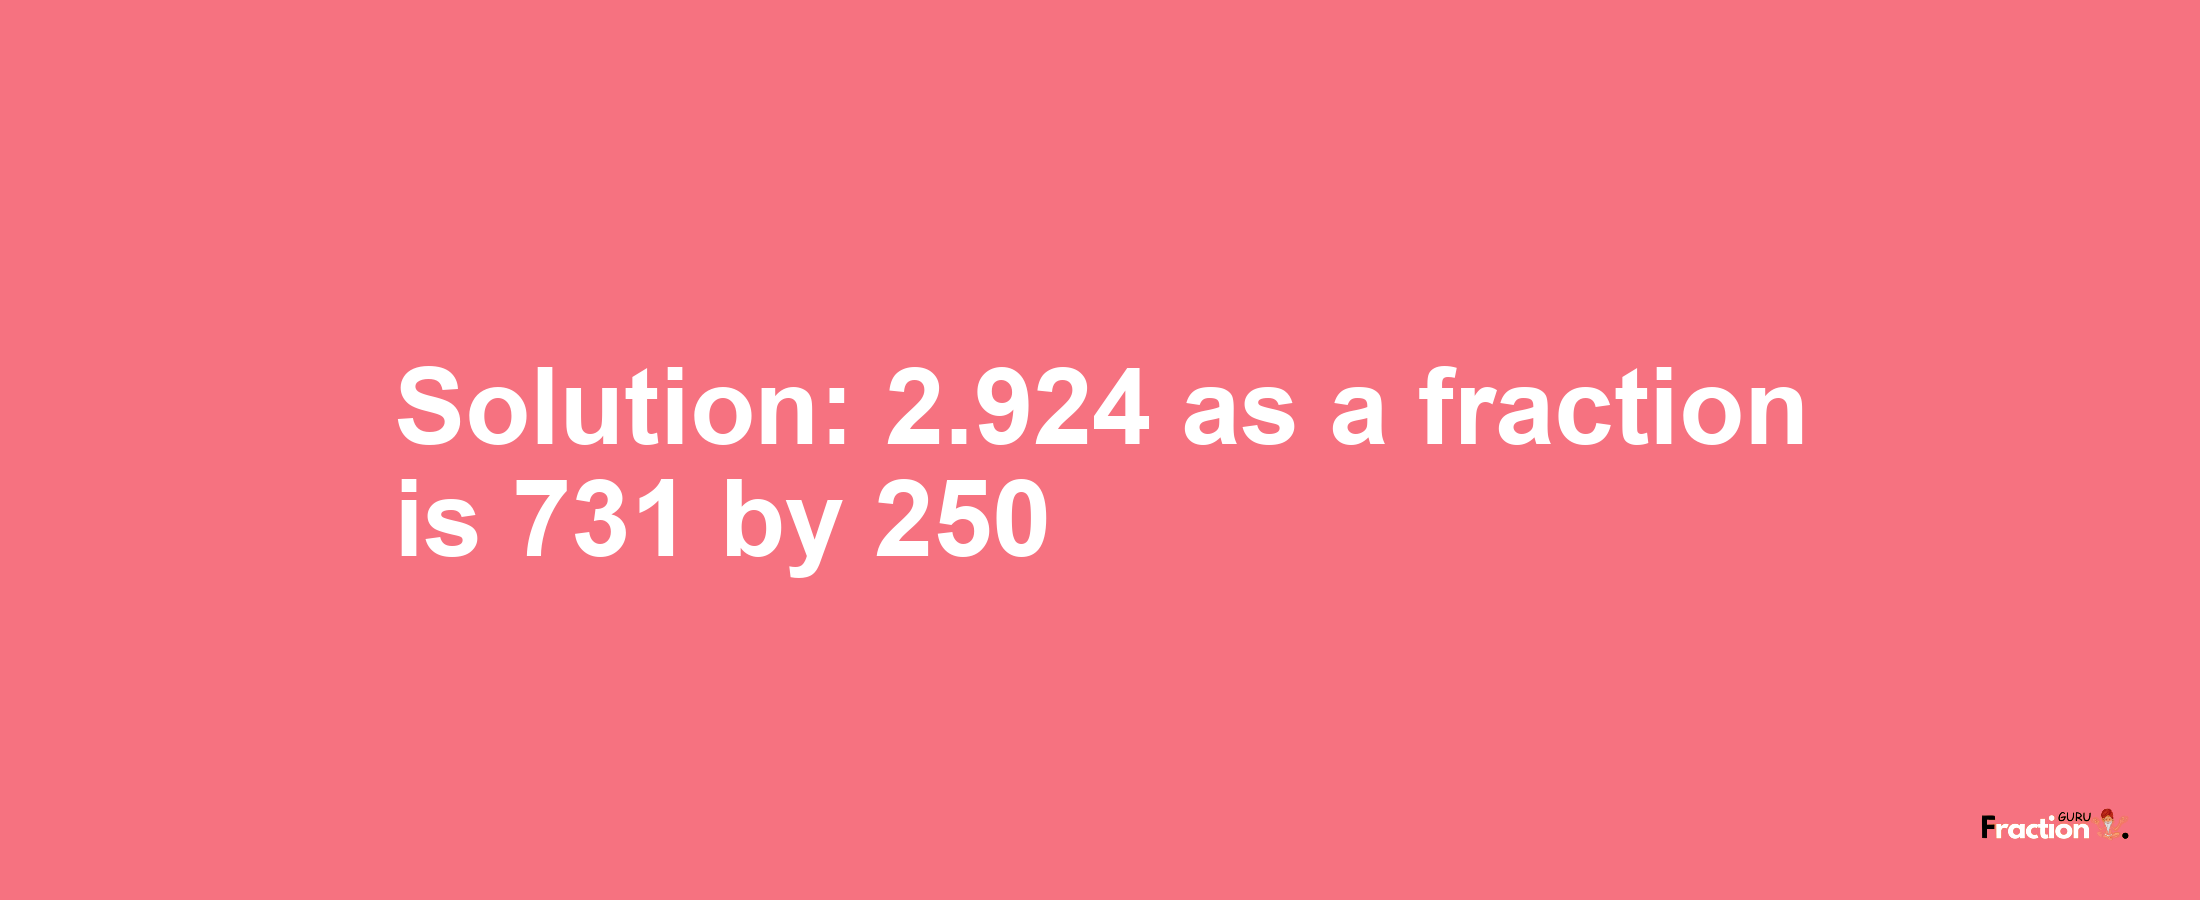 Solution:2.924 as a fraction is 731/250